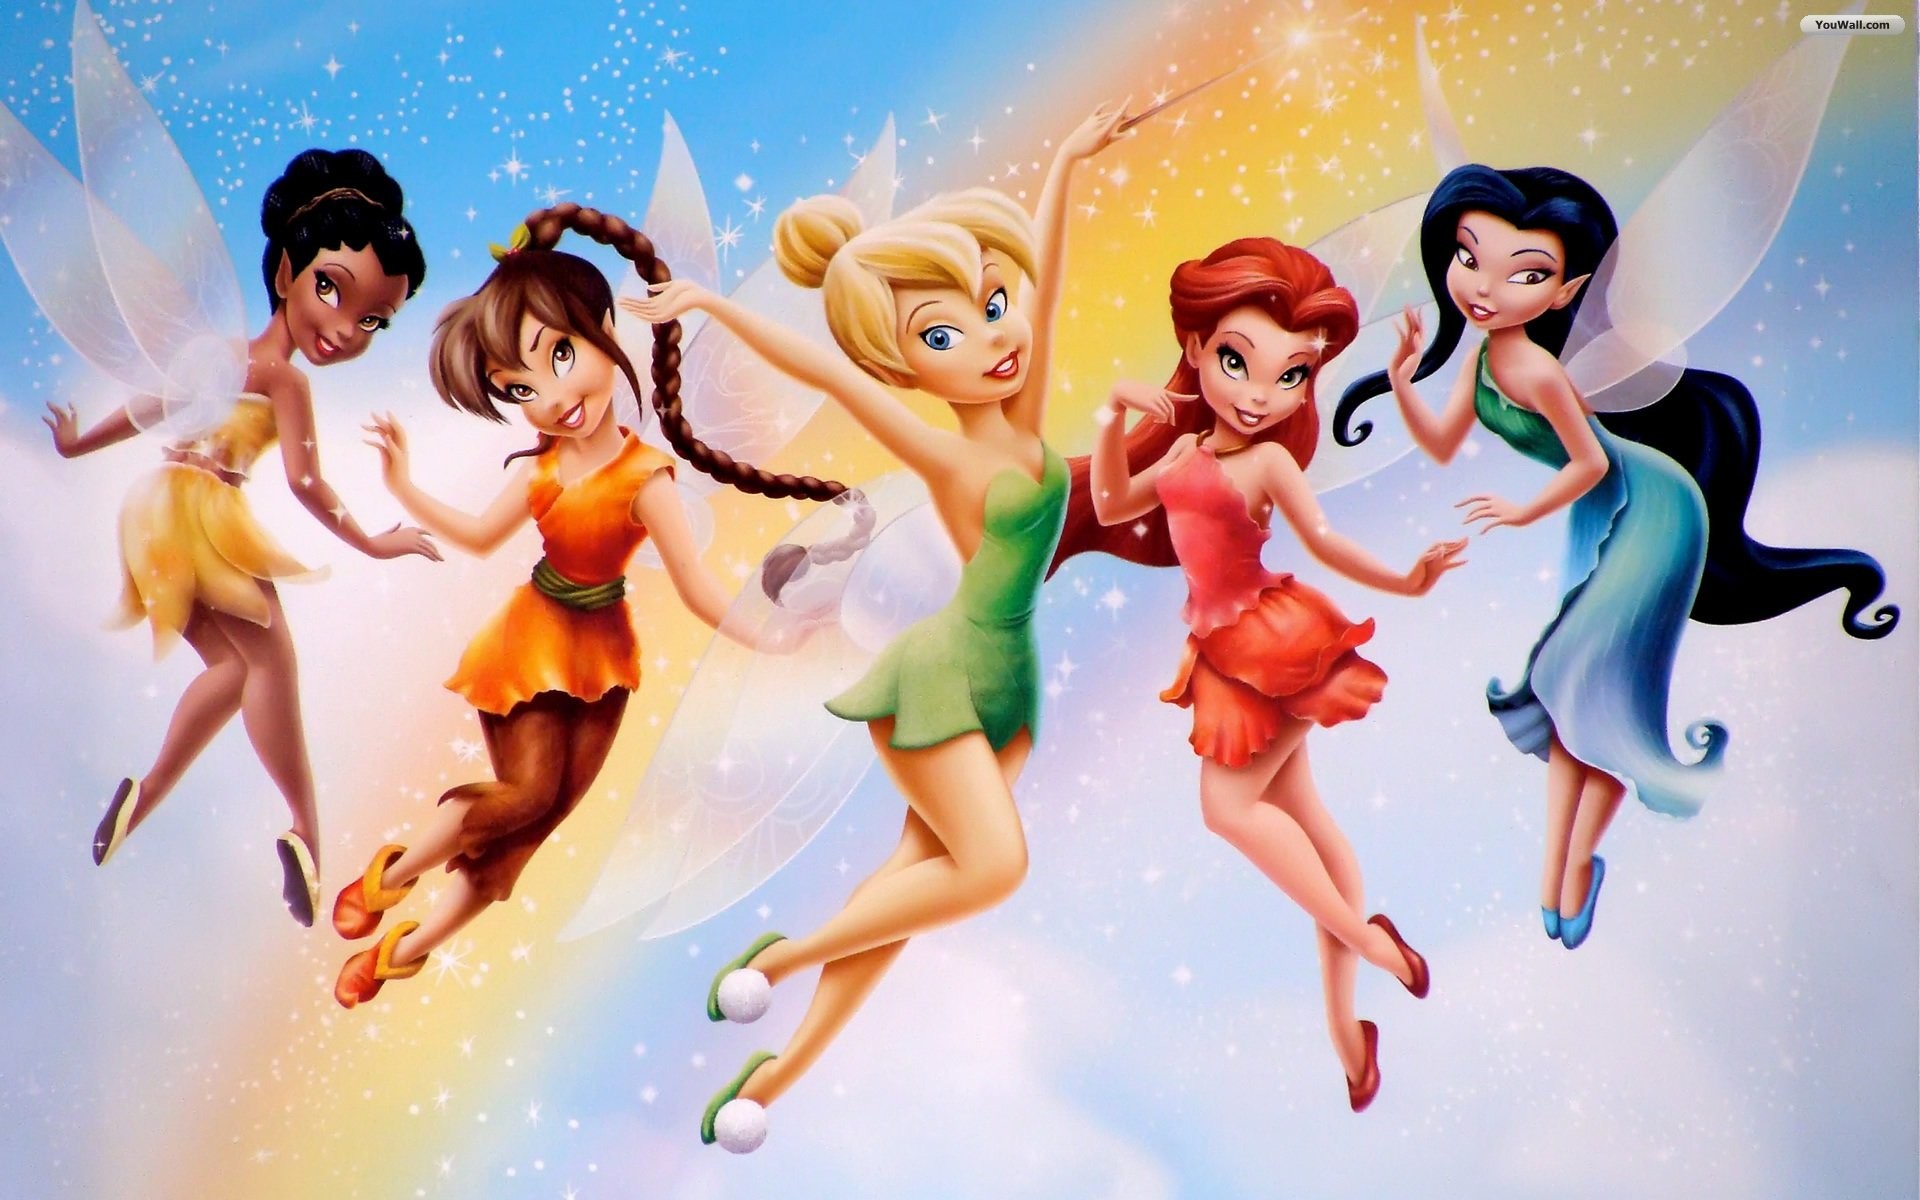 1920x1200 Tinkerbell Wallpapers - Tinkerbell desktop wallpapers - 314 and wallpapers